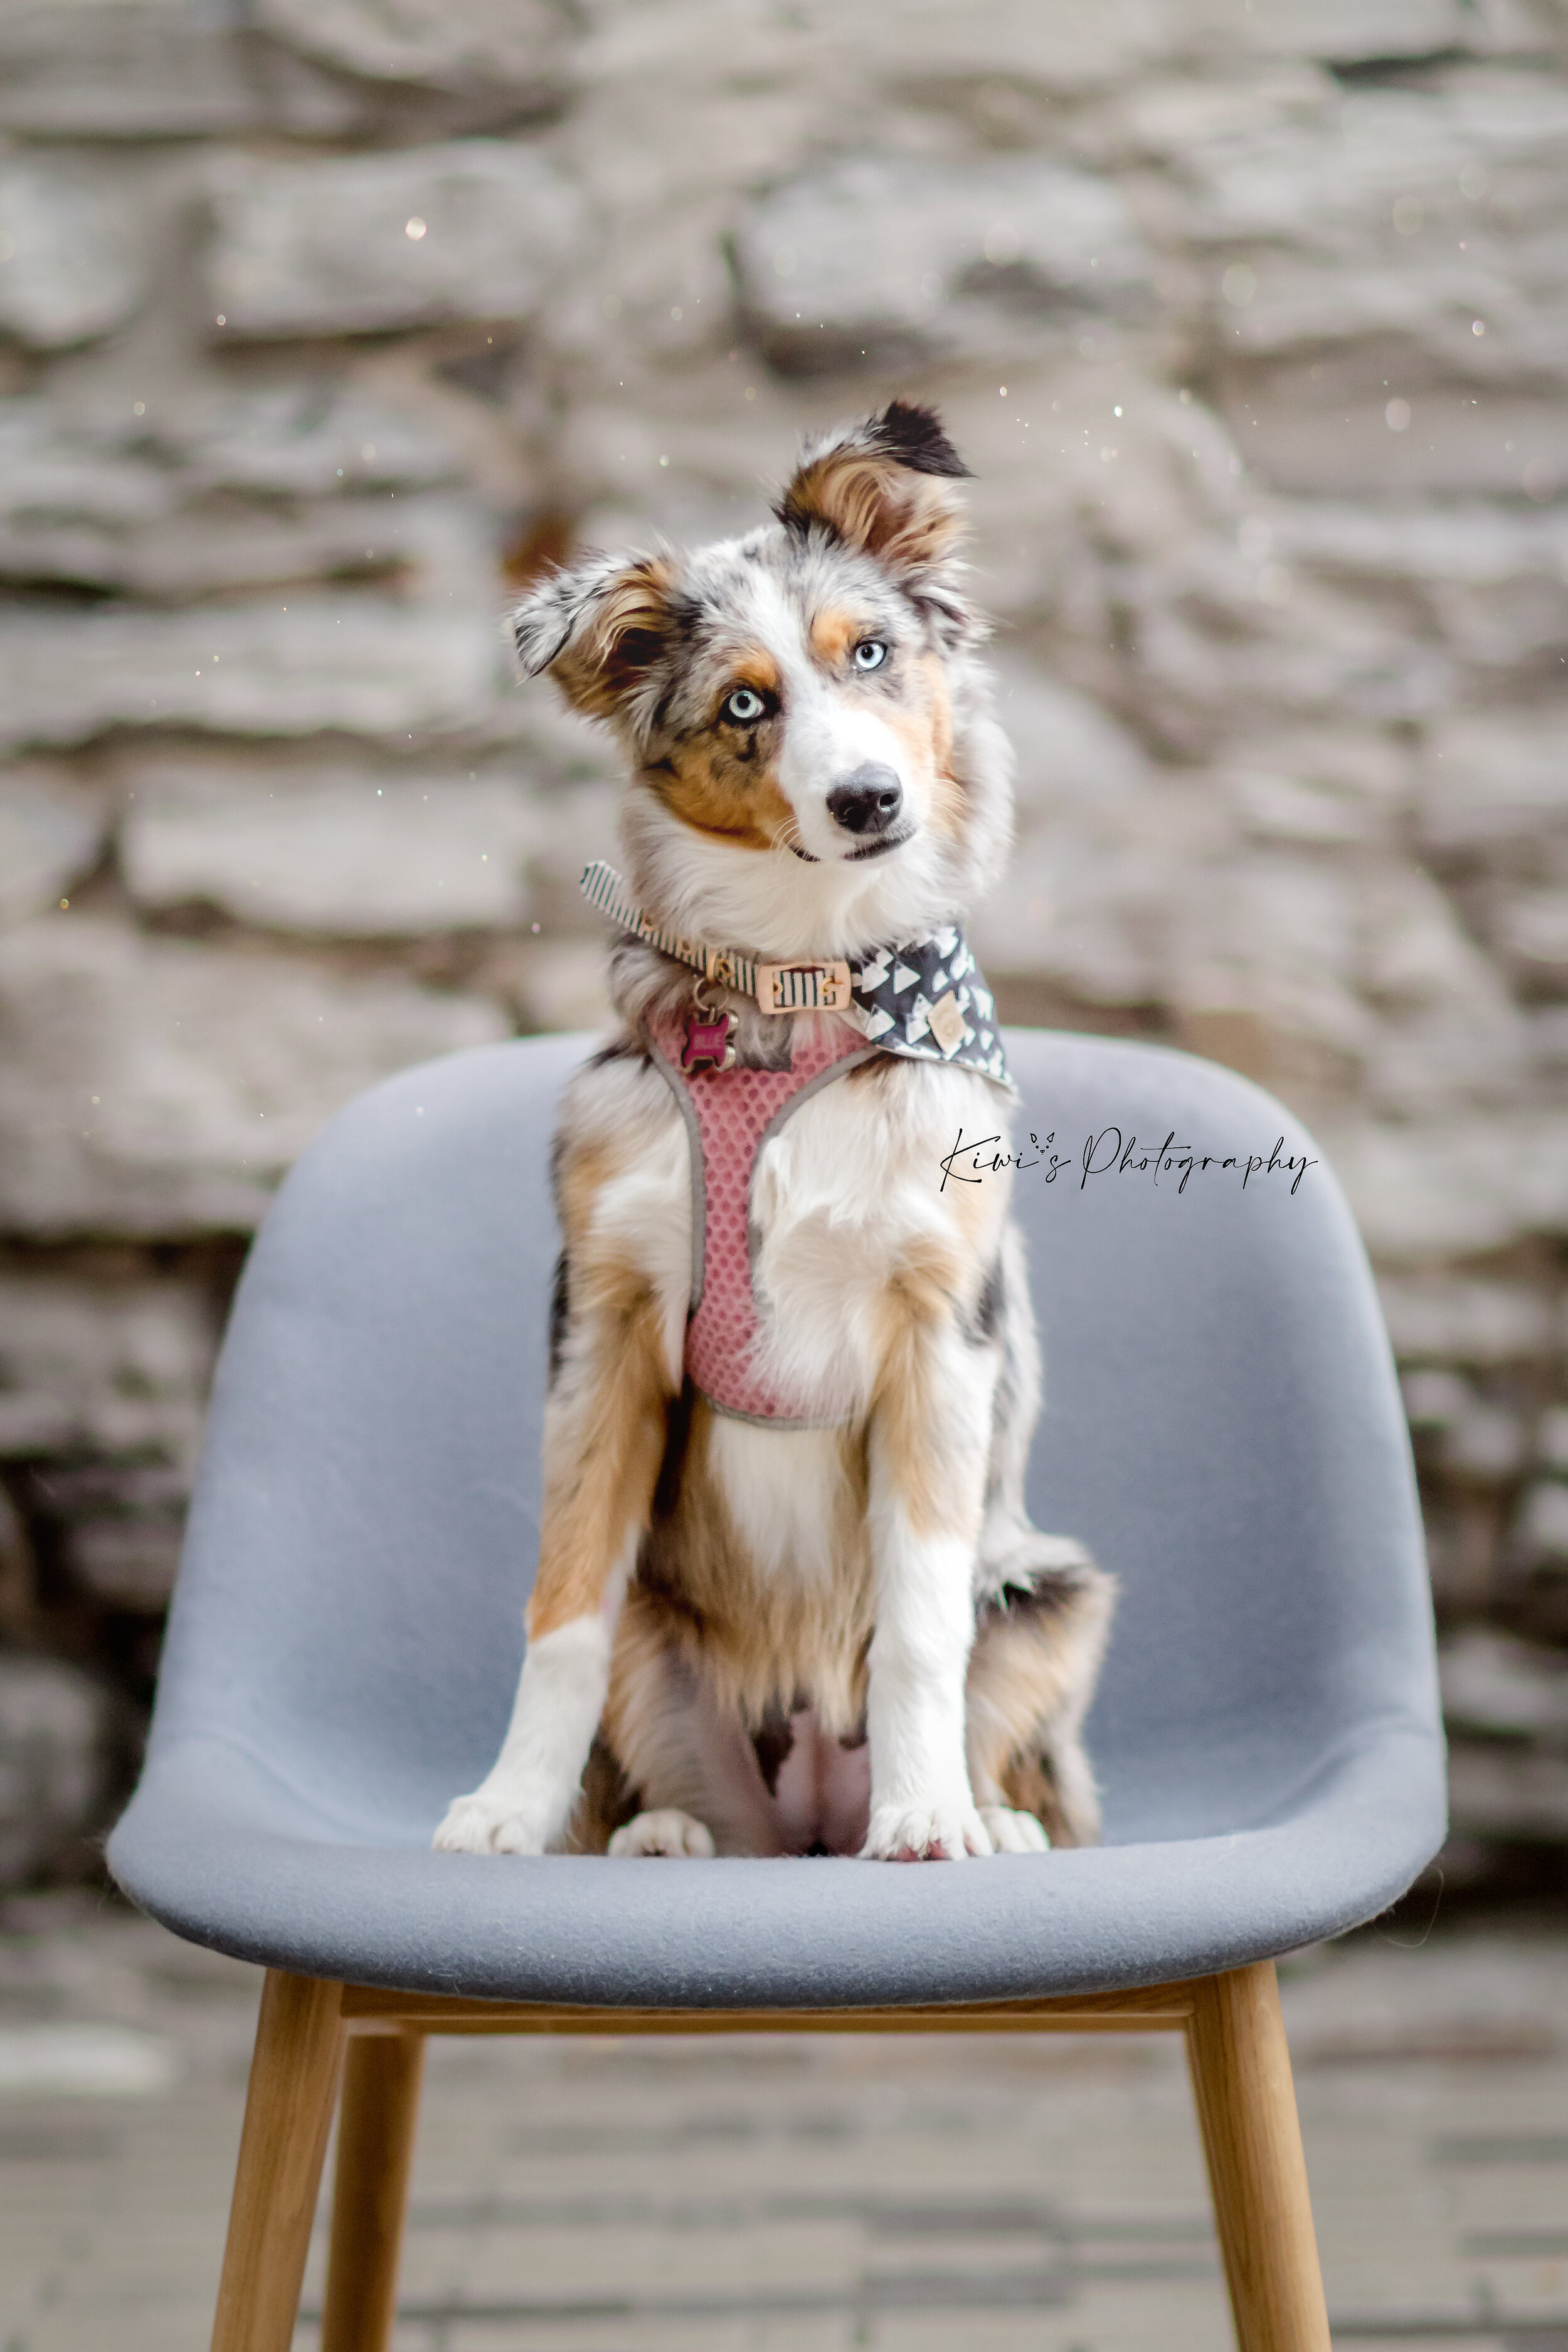 Here comes Billie the Aussie! I love her beautiful colors, I think she looks pawfect on that chair.